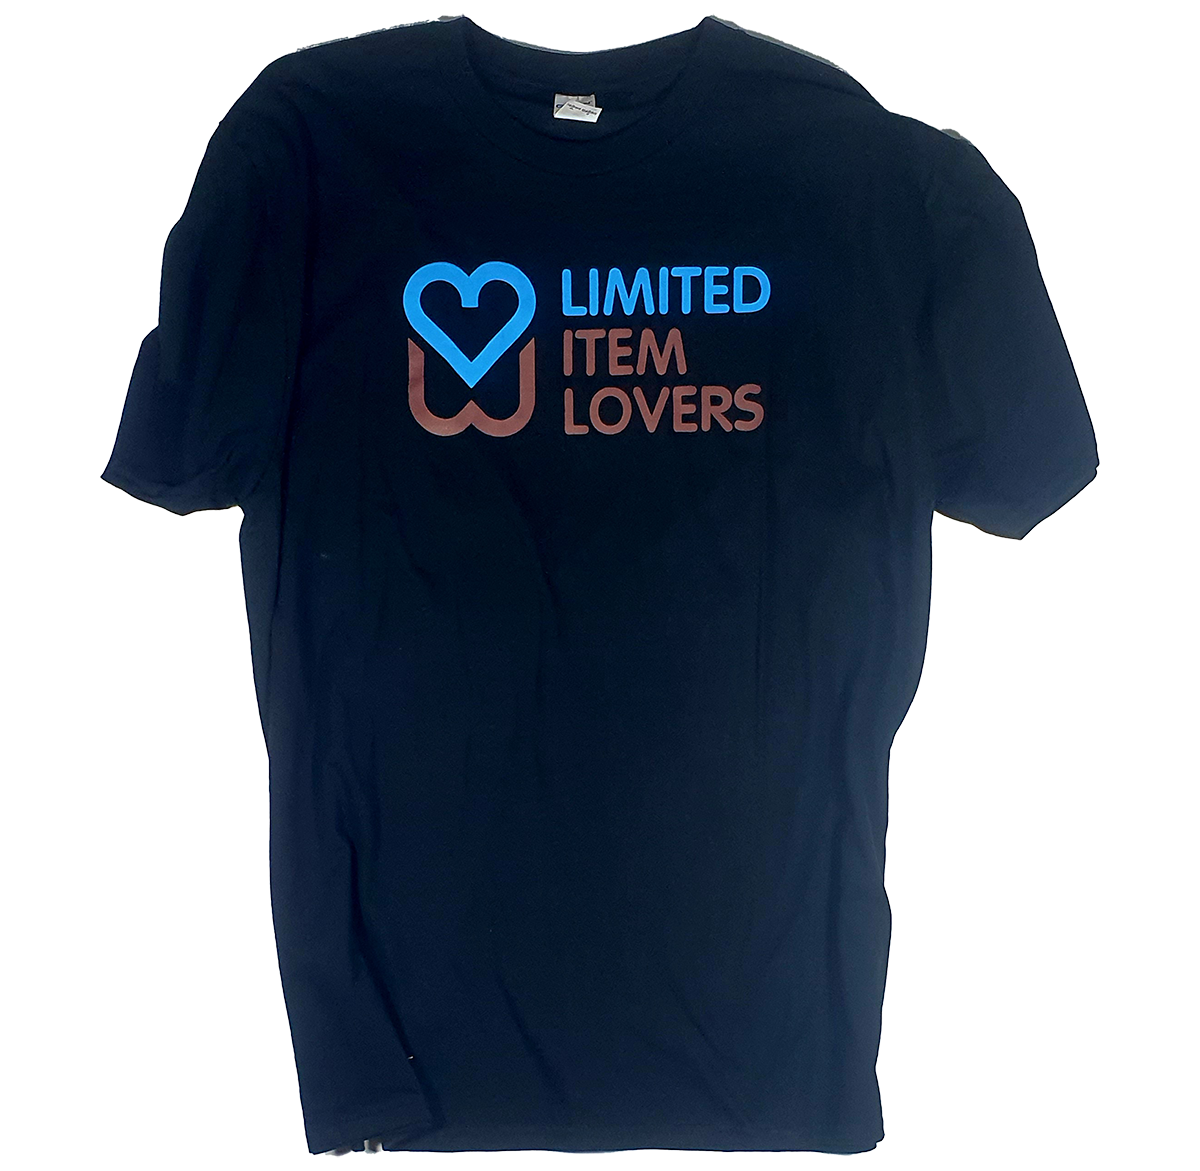 Limited item lovers logo T shirt